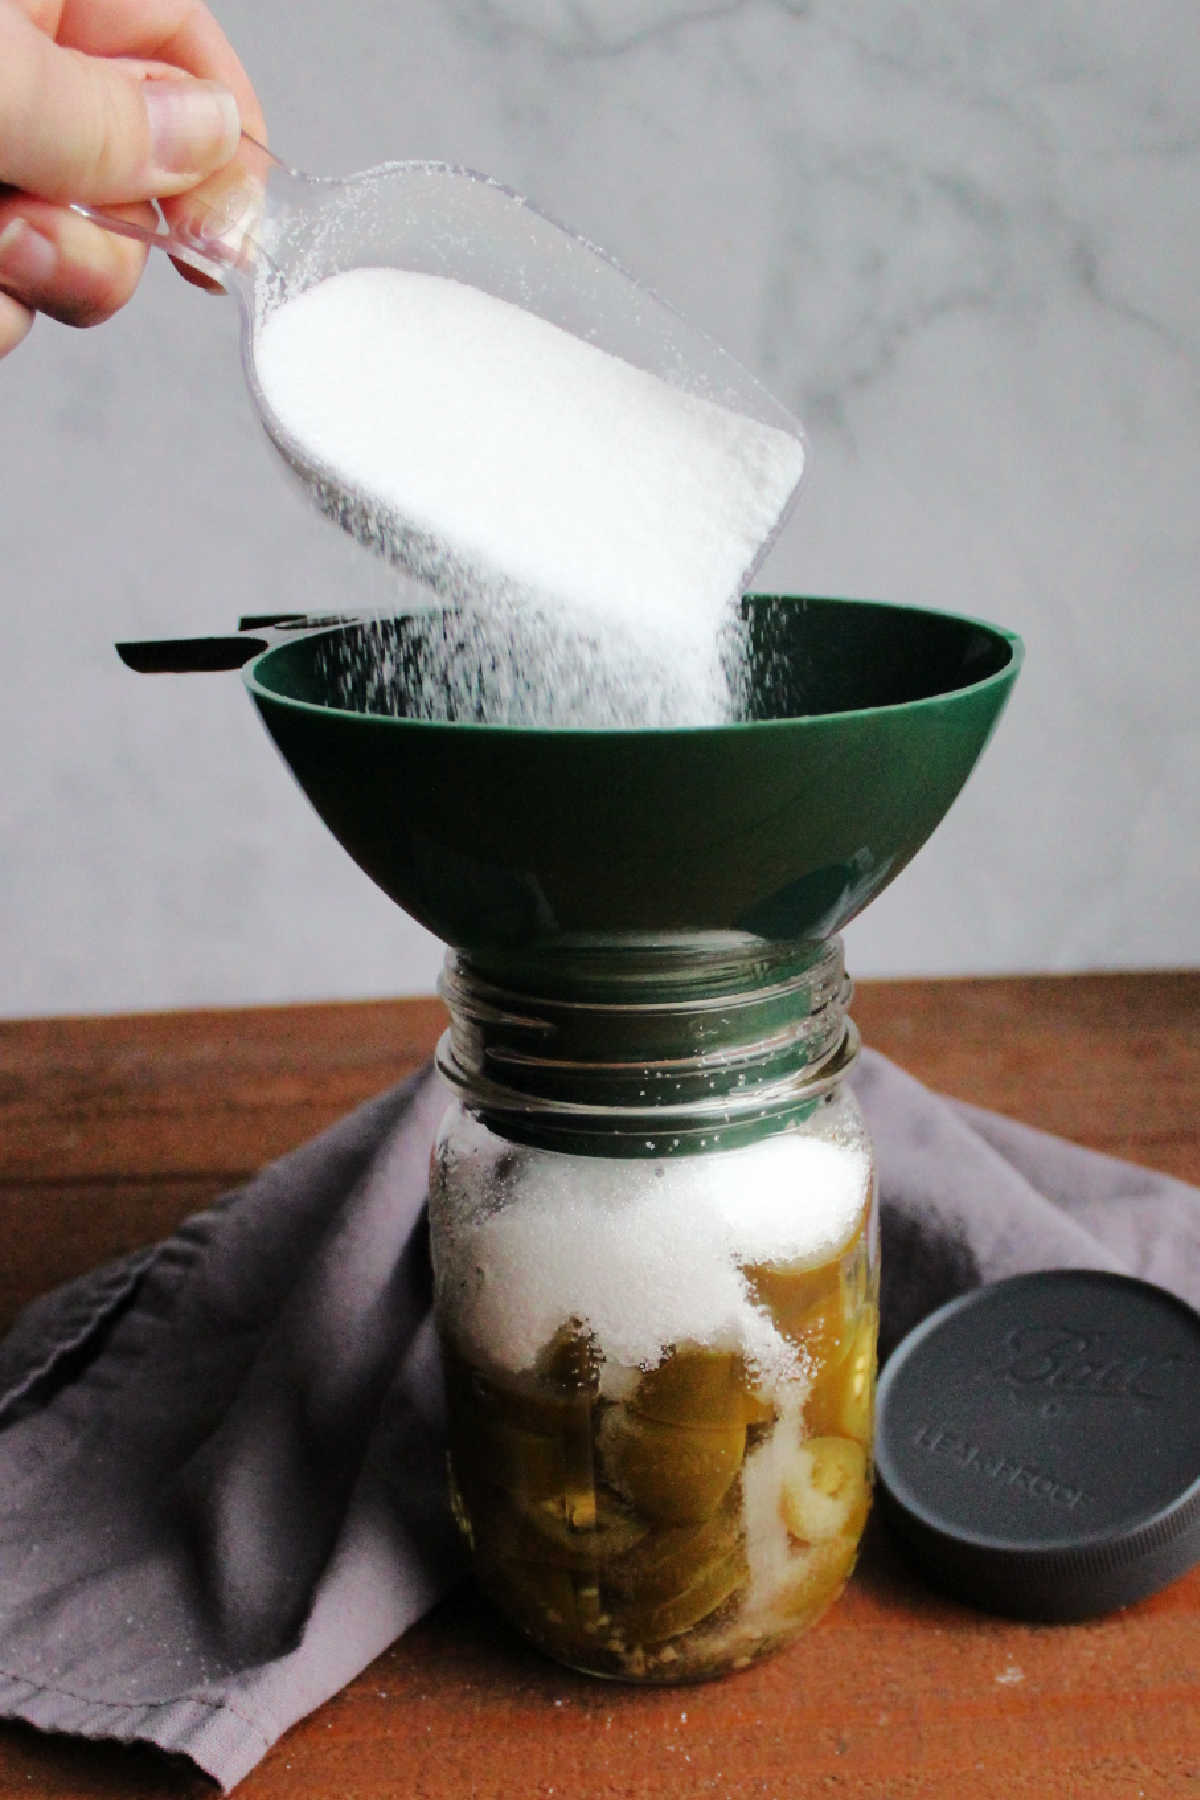 Pouring sugar into jar of pickled jalapenos.